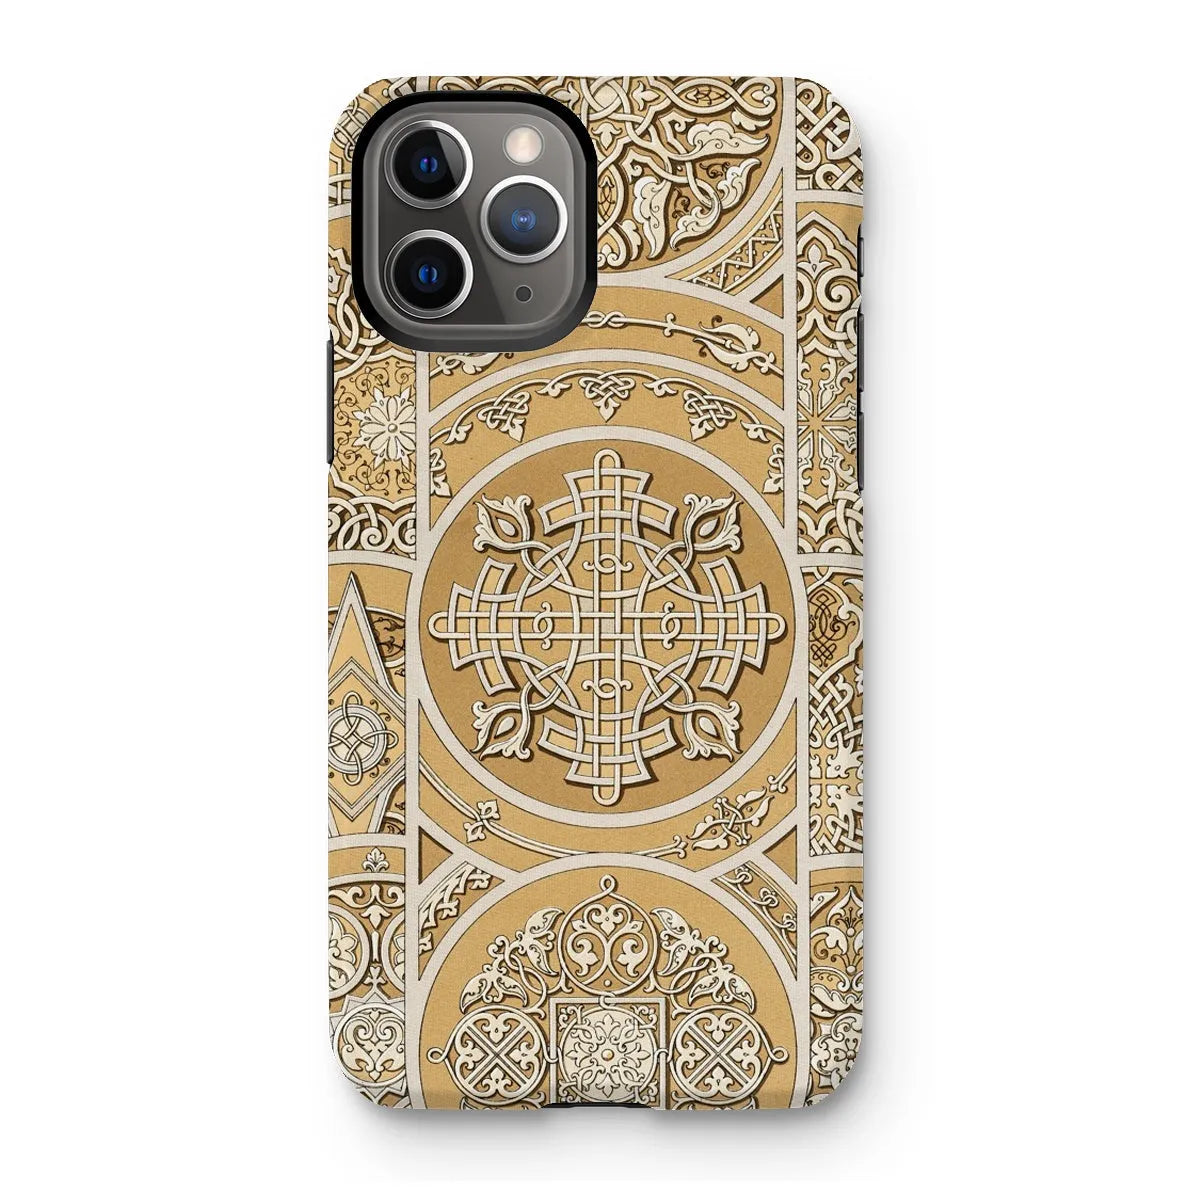 Russian Pattern By Auguste Racinet Tough Phone Case - Iphone 11 Pro / Matte - Mobile Phone Cases - Aesthetic Art